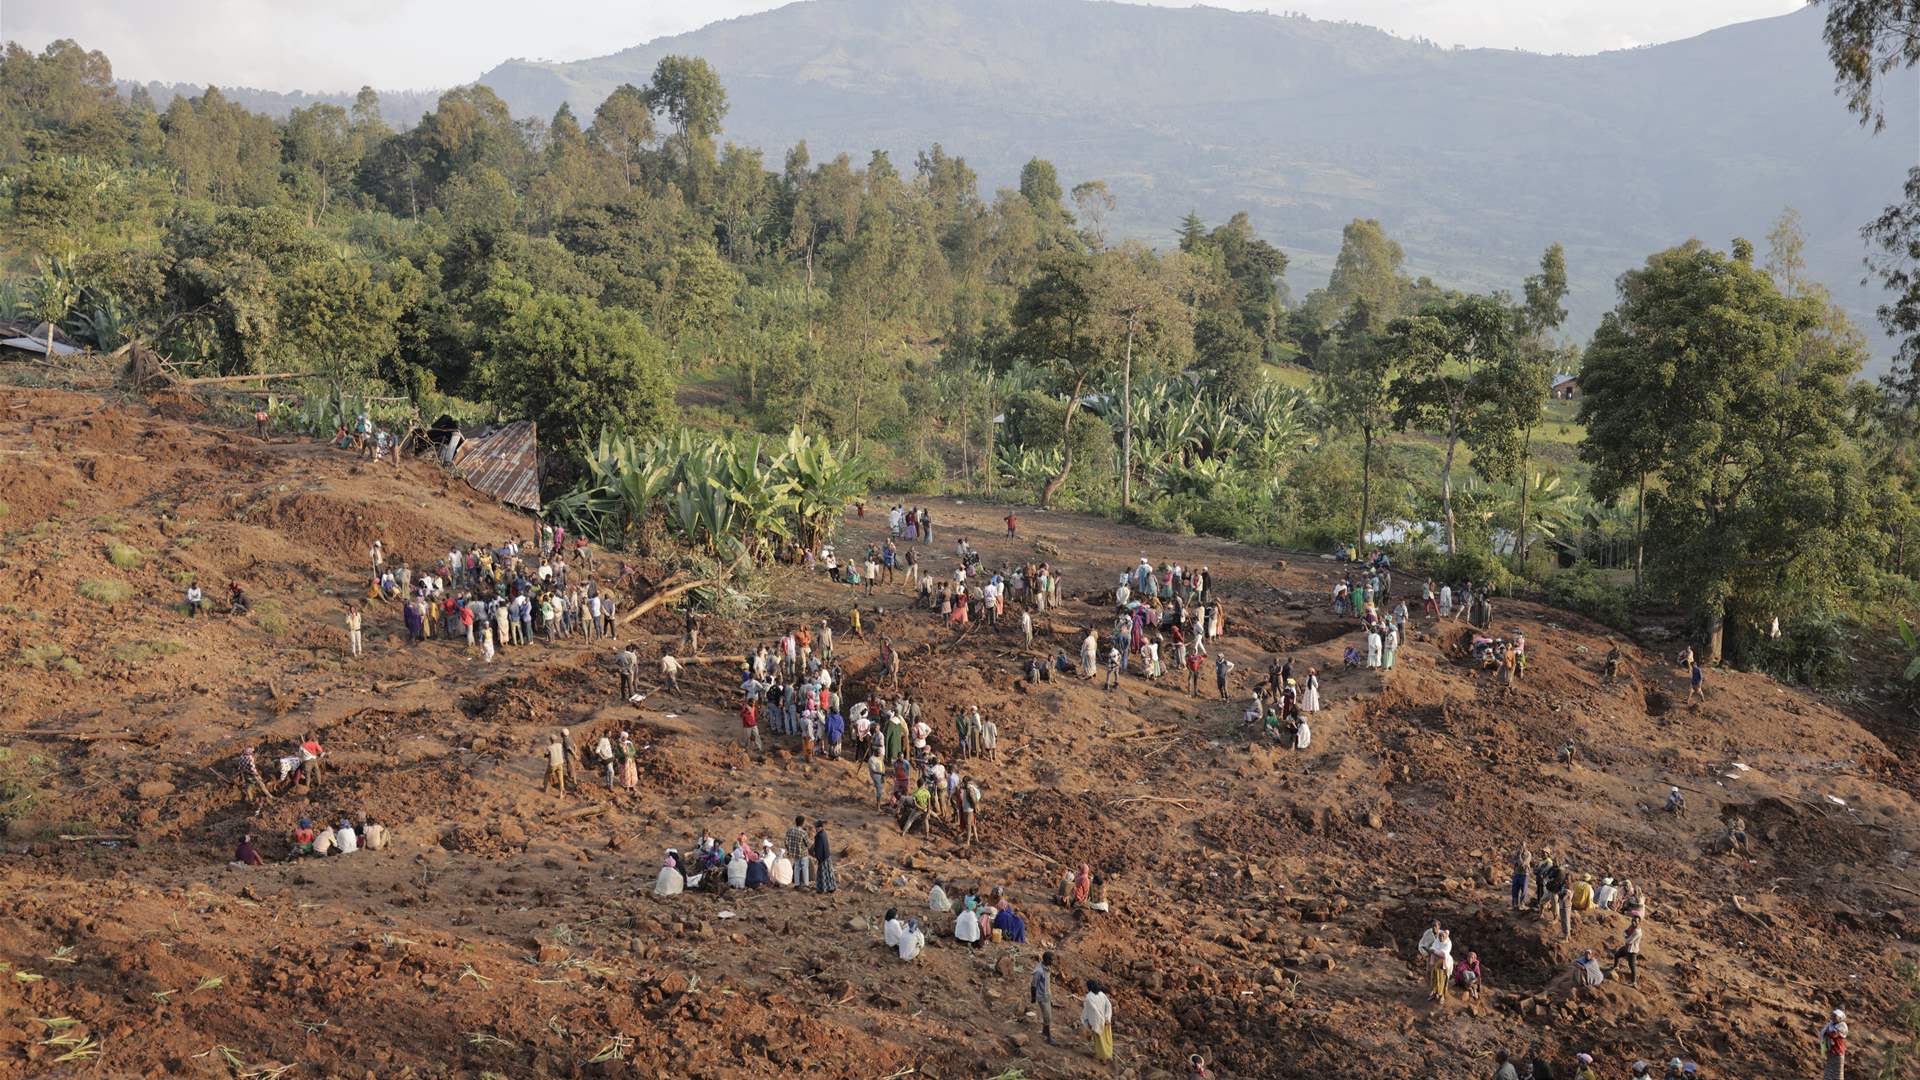 Ethiopia landslide death toll rises to 257, could reach up to 500: UN says